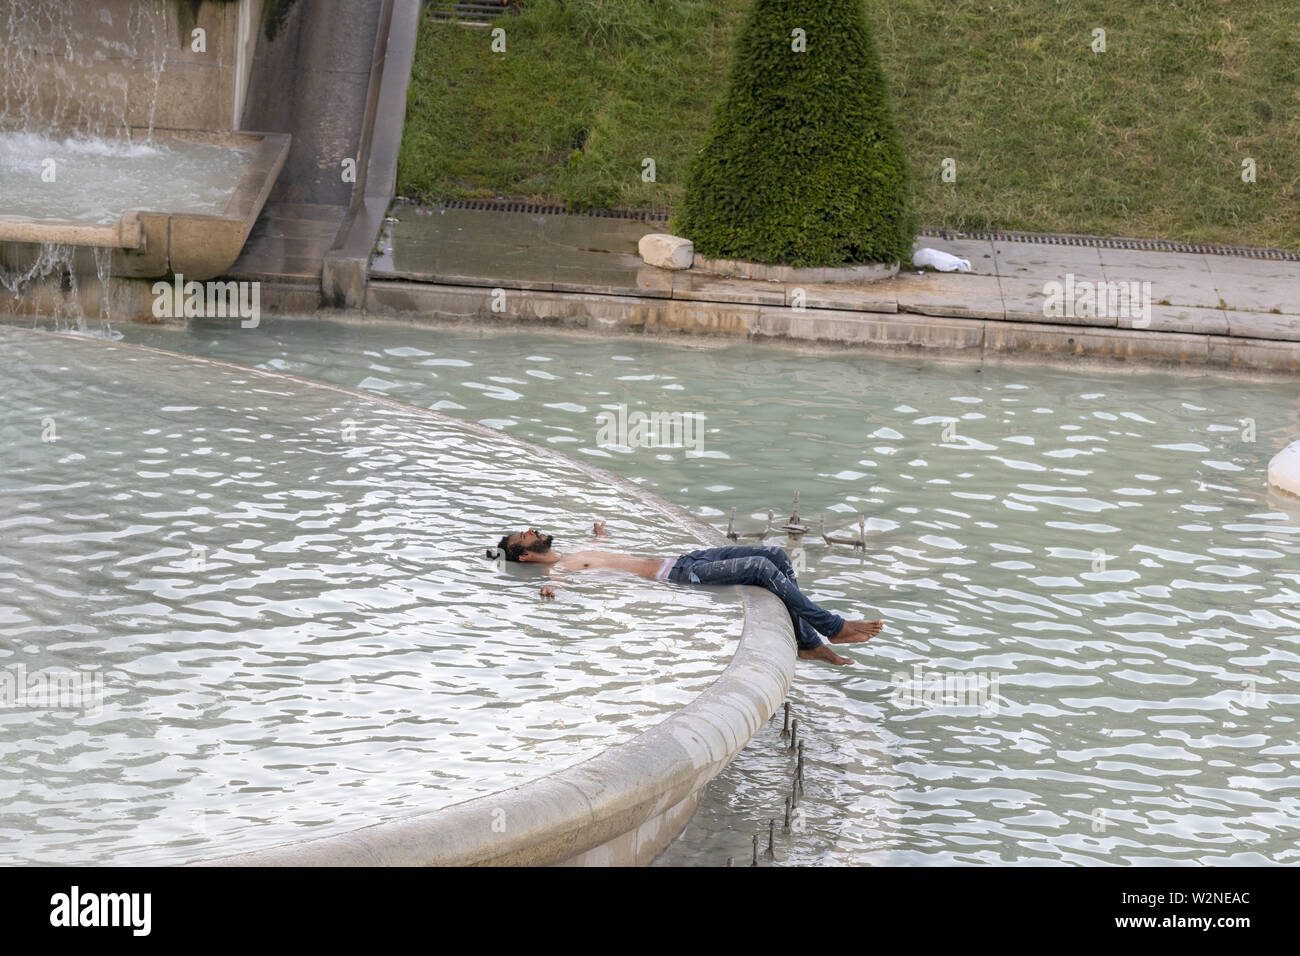 Europe, France, Paris, 2019-06, The Trocadero gardins a popular touristic attraction facing the Eiffel Tower shows people bathing in the fountains in Stock Photo